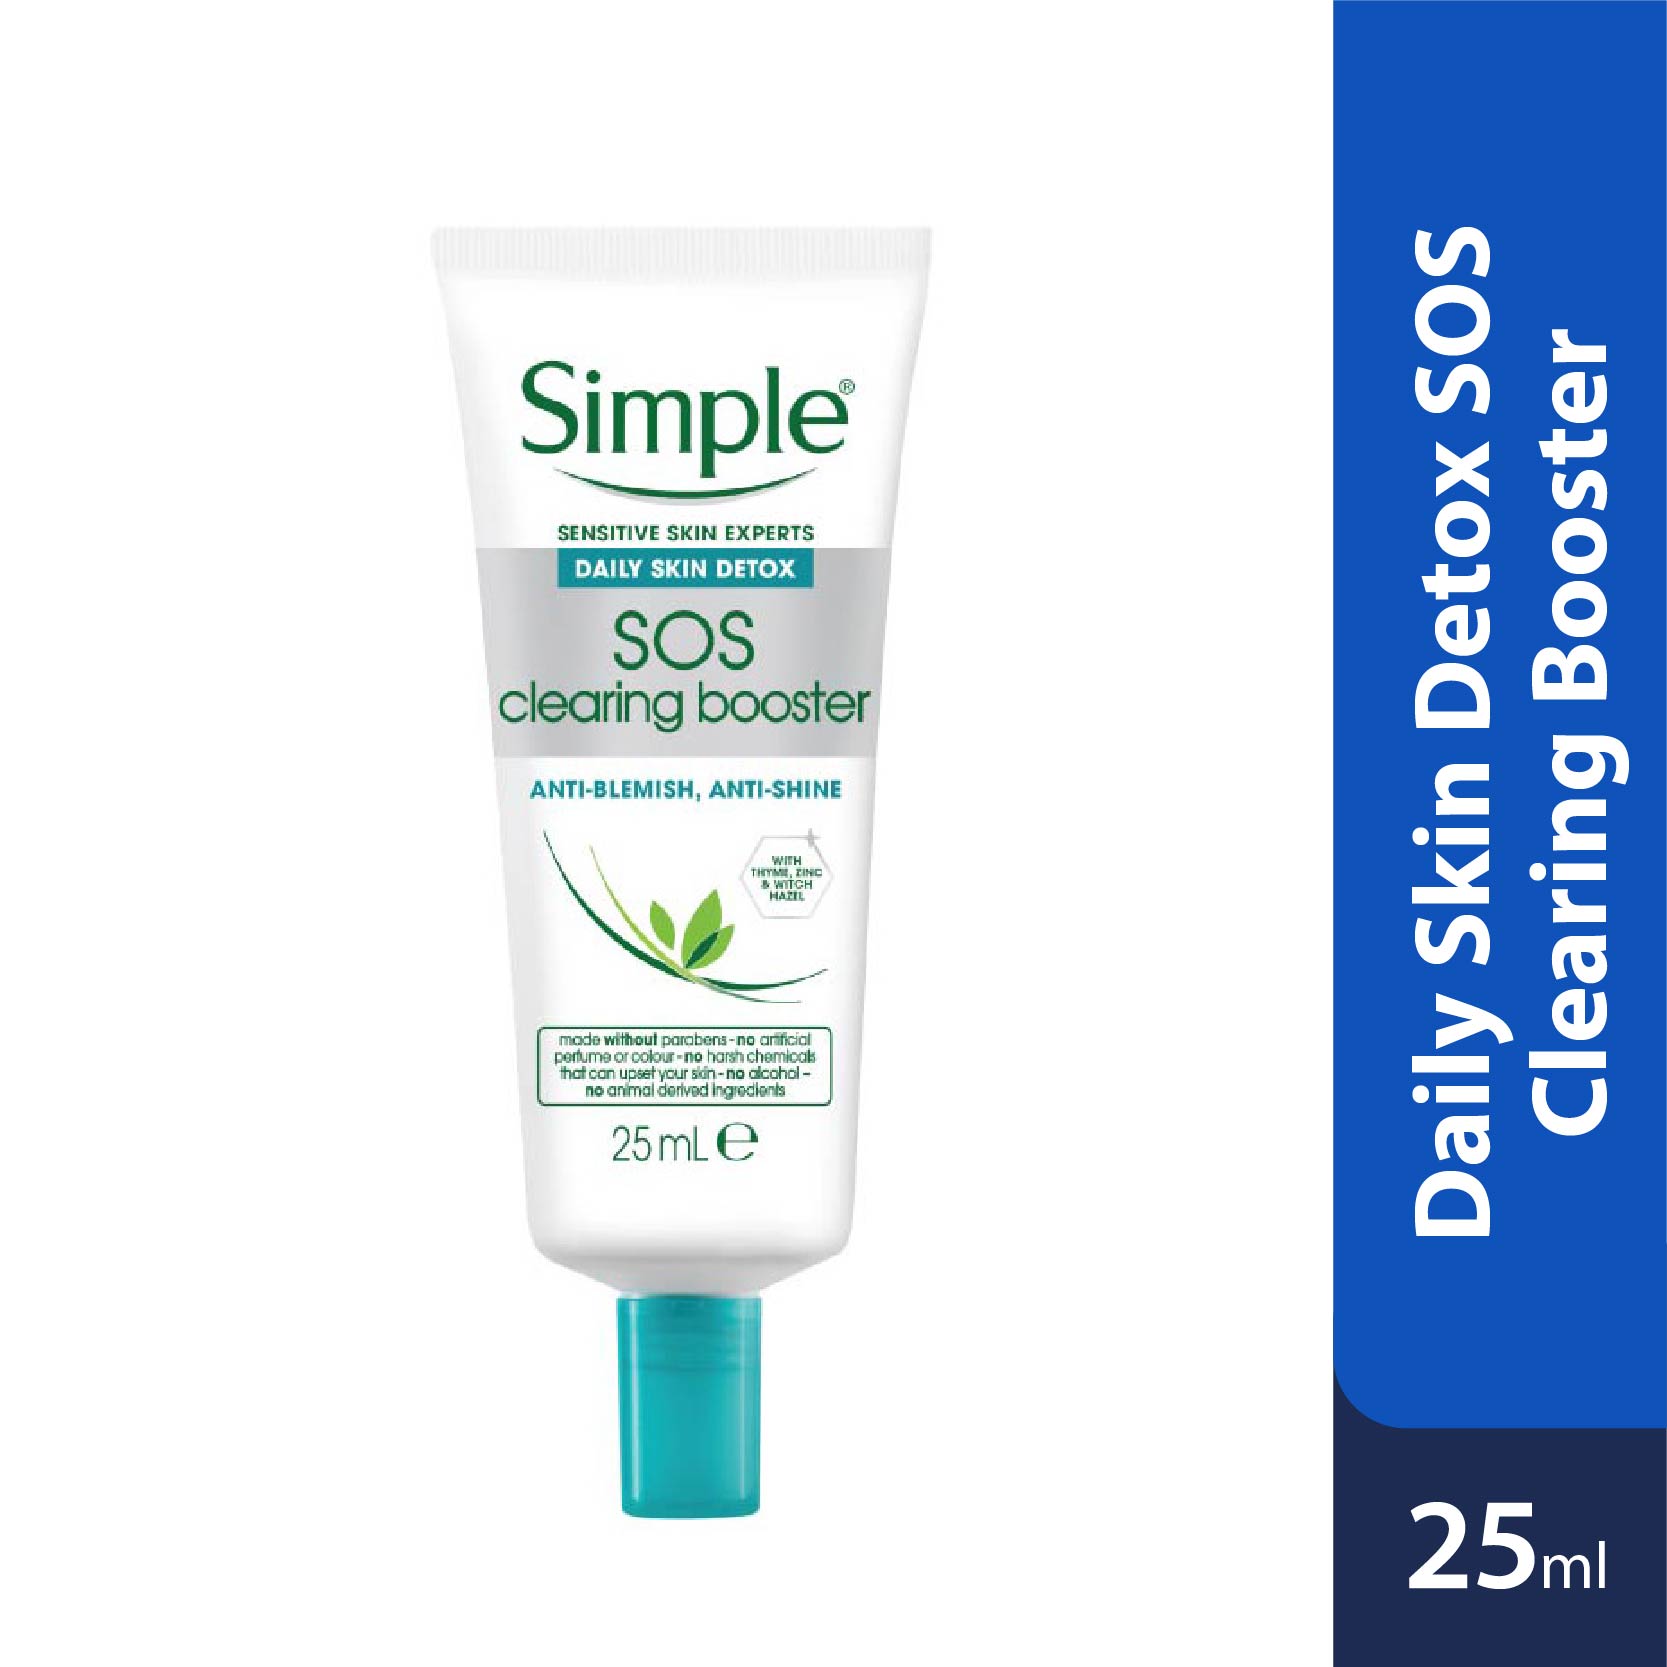 Simple Daily Skin Detox Sos Clearing Booster 25ml - Alpro Pharmacy